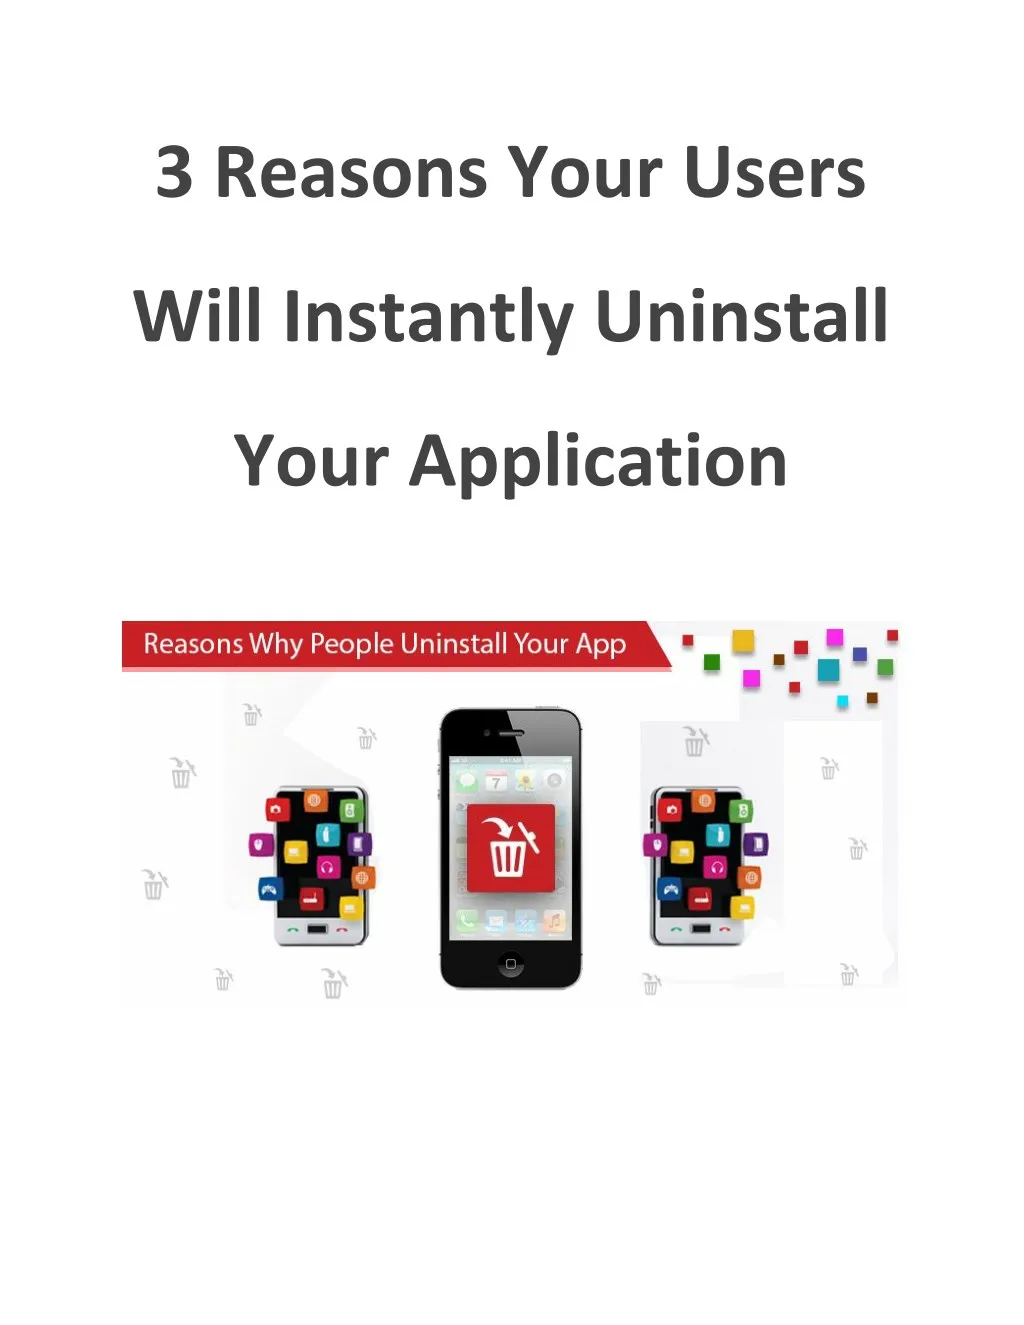 3 reasons your users